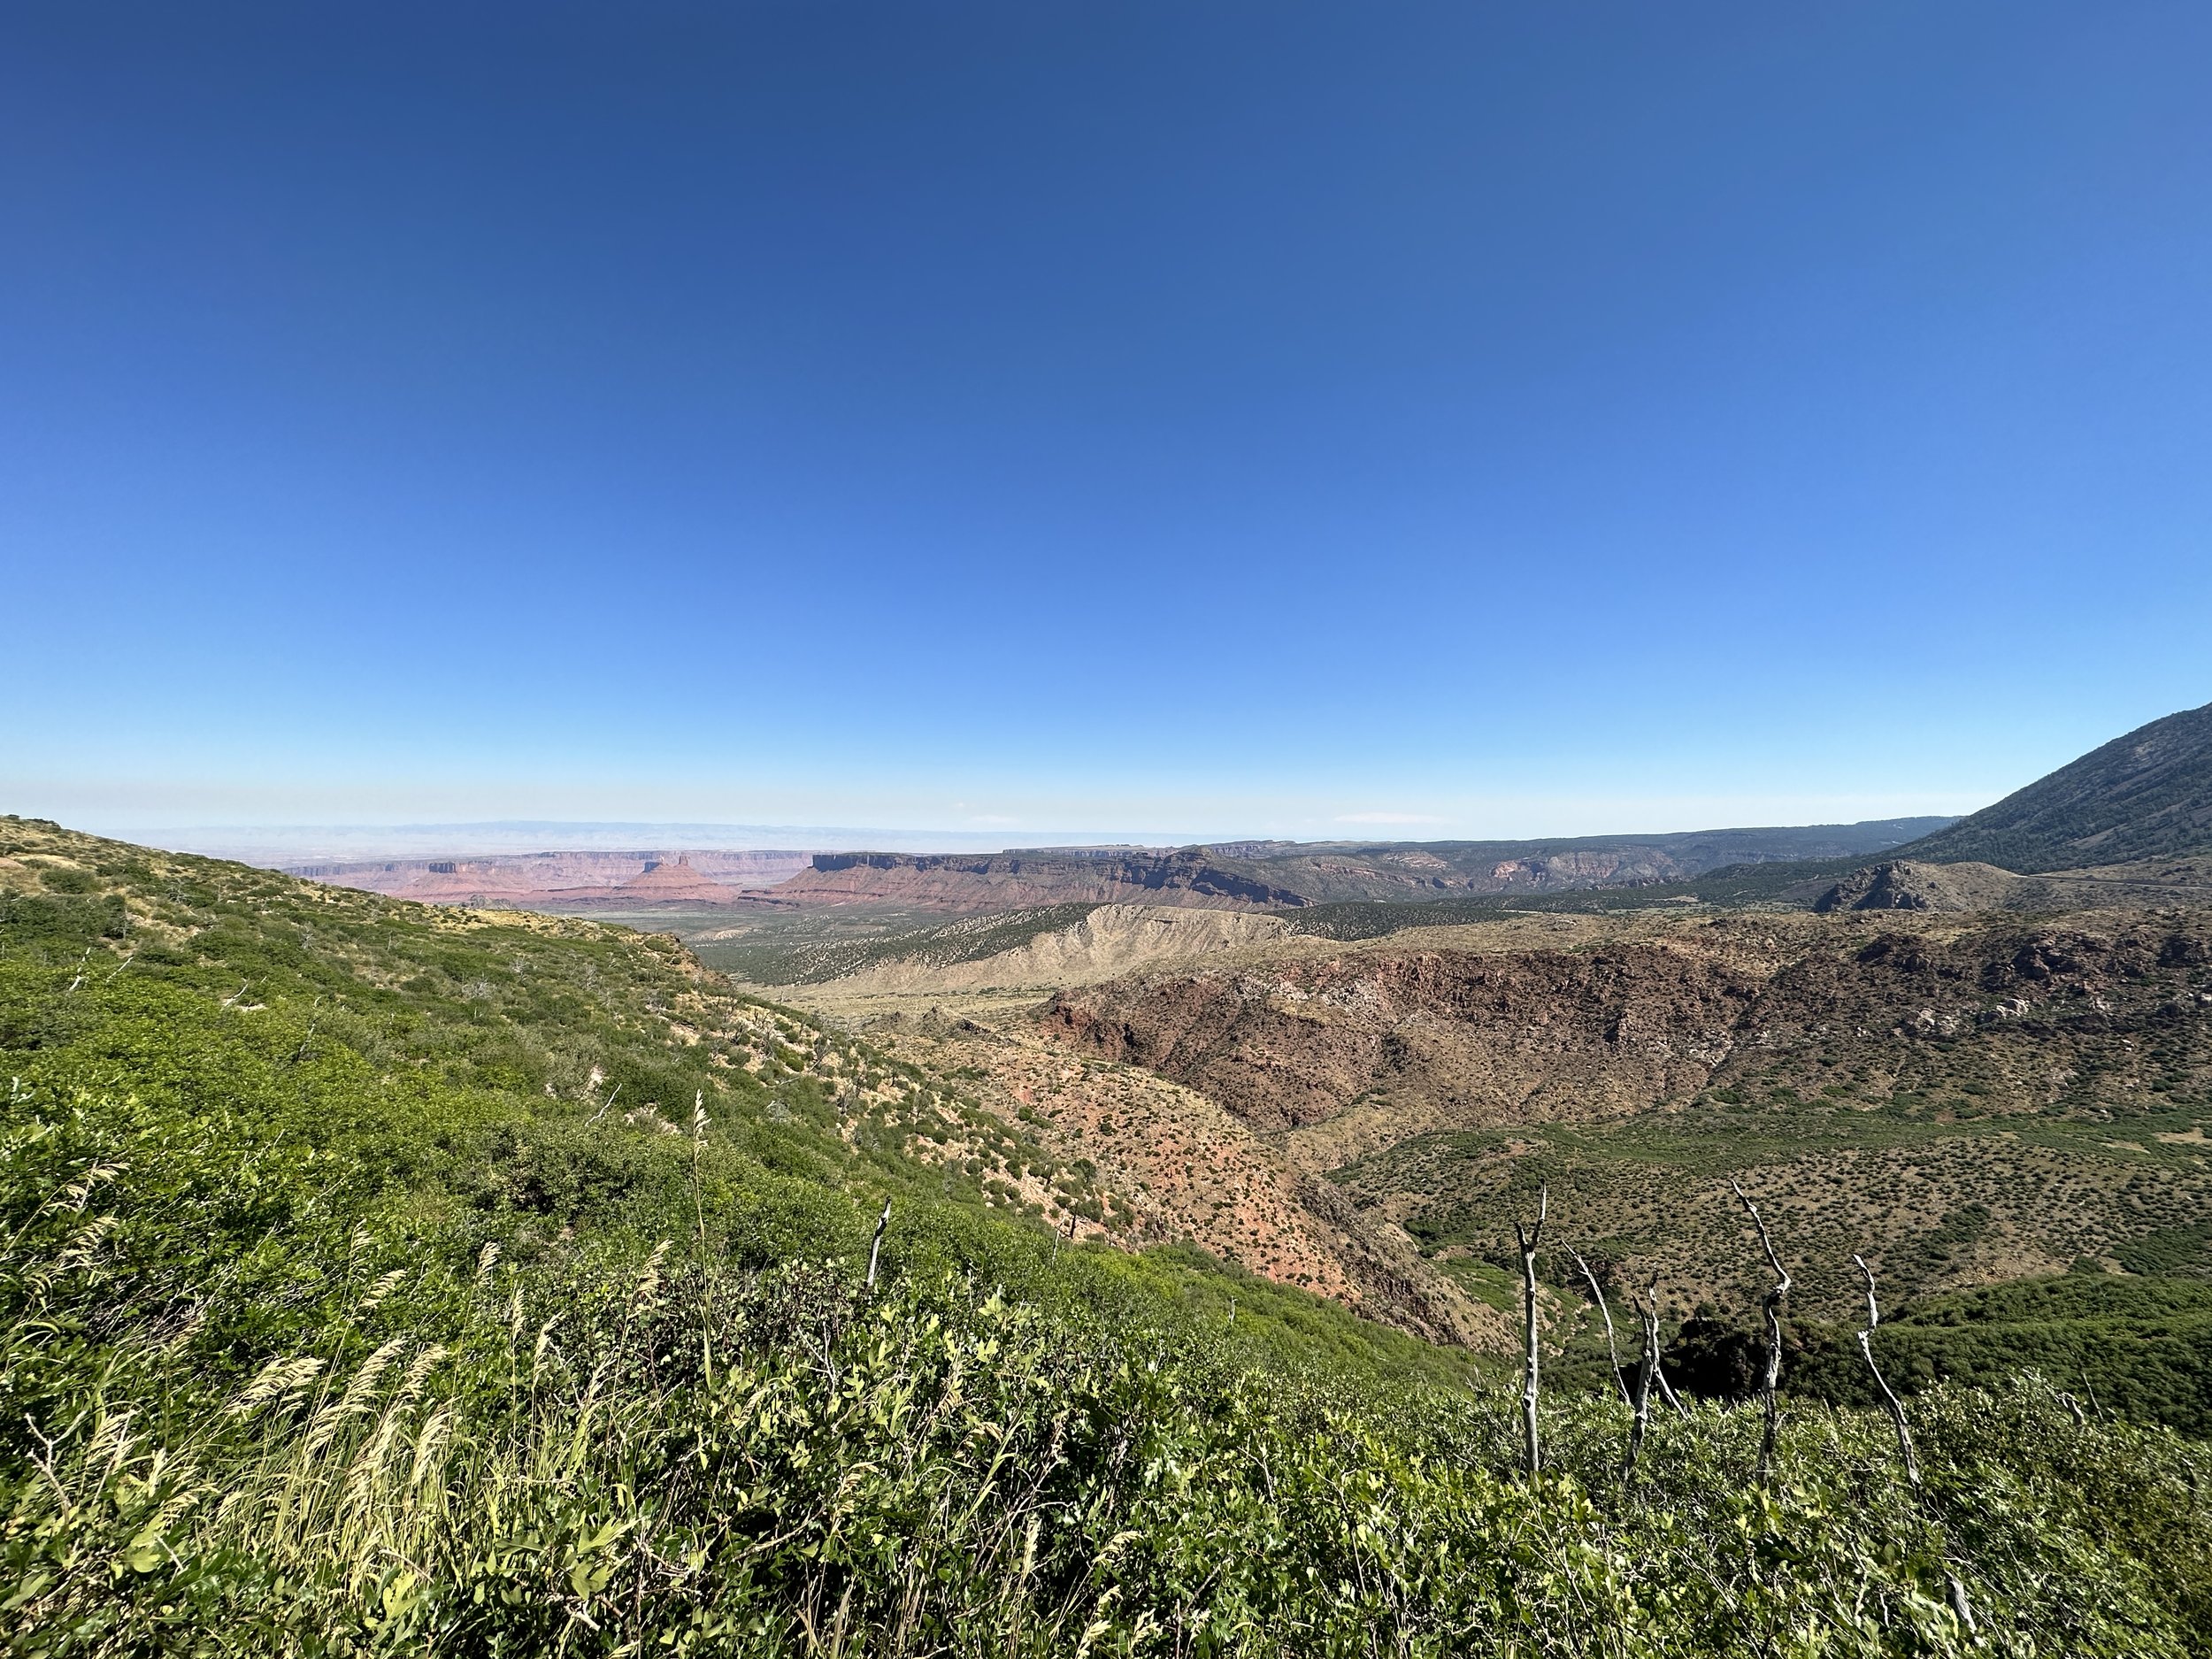 View from the Kokopelli trail